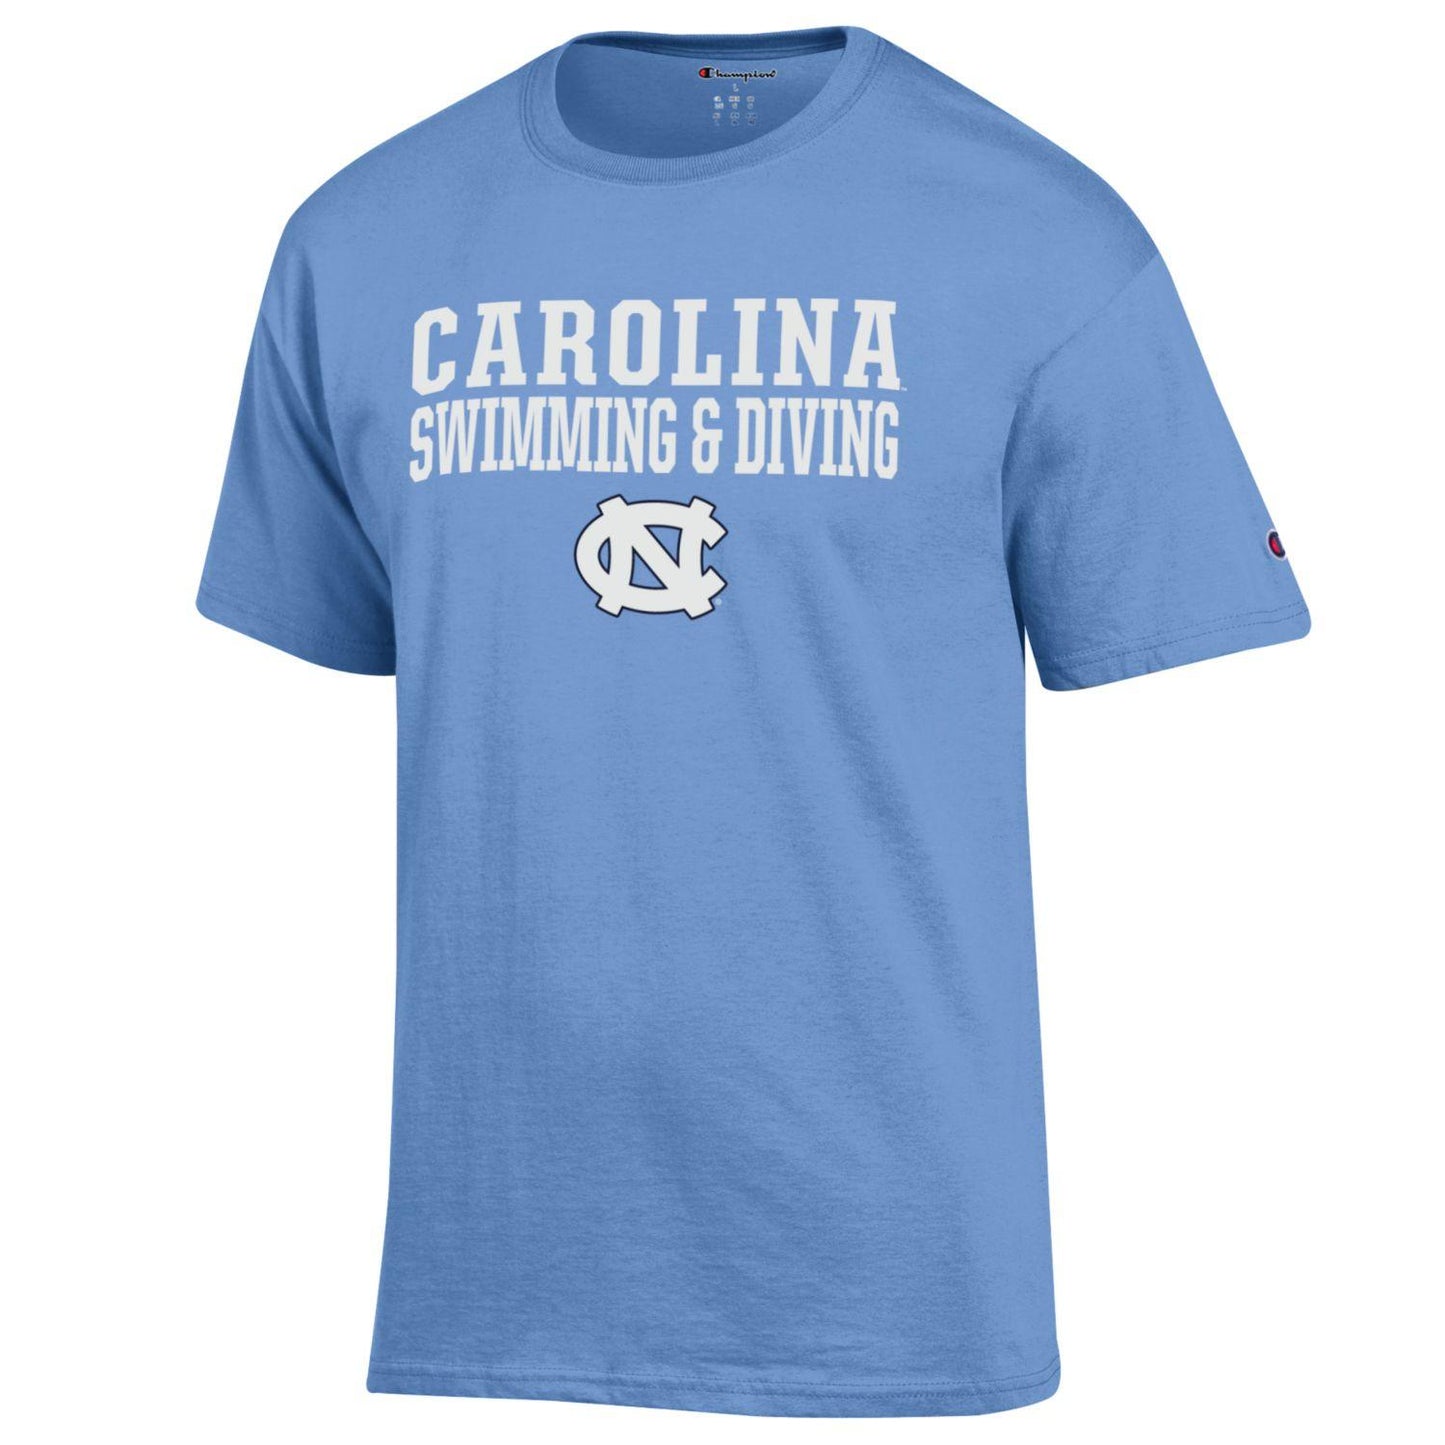 Carolina Swimming and Diving T-Shirt with UNC Logo by Champion